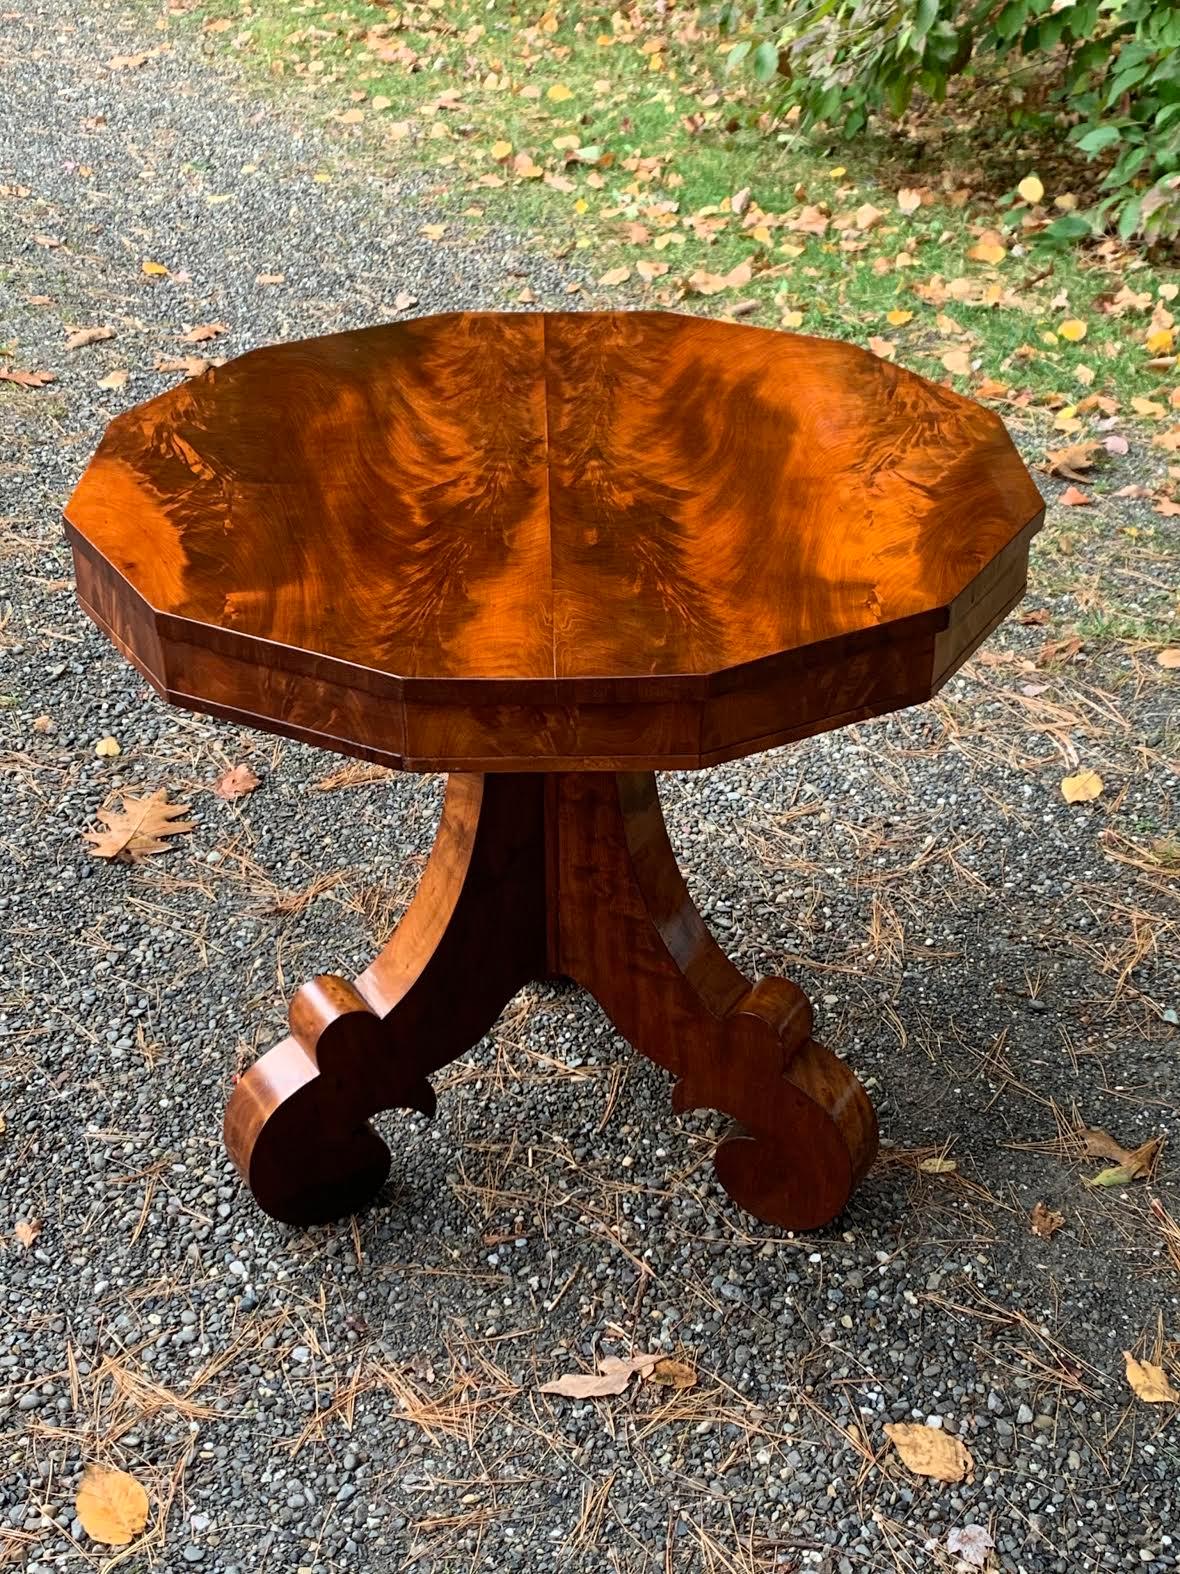 19th century American Empire style side table with twelve sides.
Pedestal base with tripod leg.
Crotch mahogany top with cherry base.
Recently refinished.